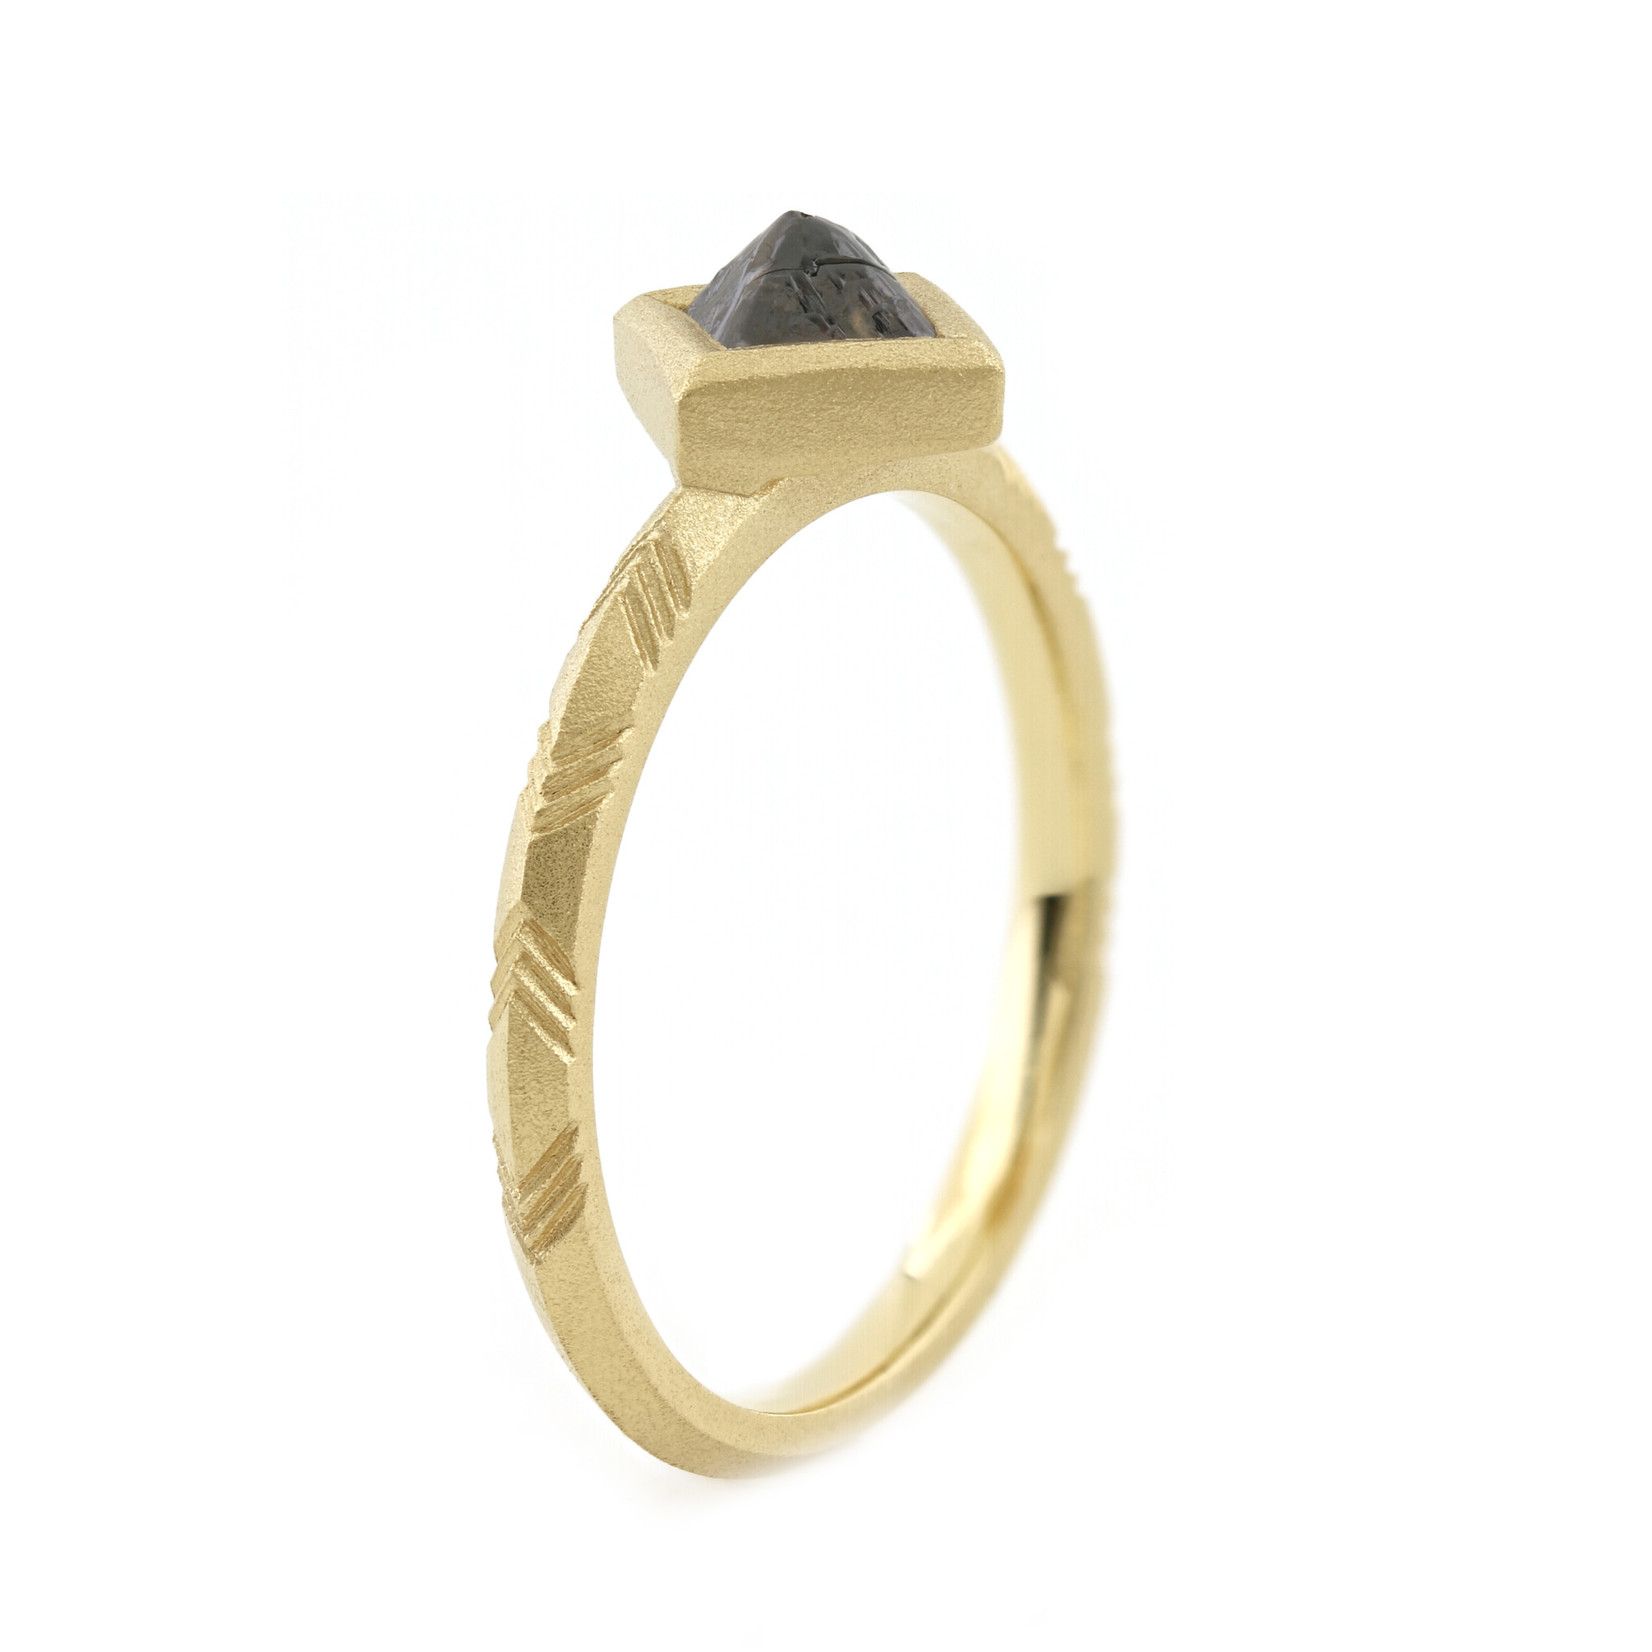 Baxter Moerman Shelby Ring with Sawed Octahedron Diamond in Yellow Gold